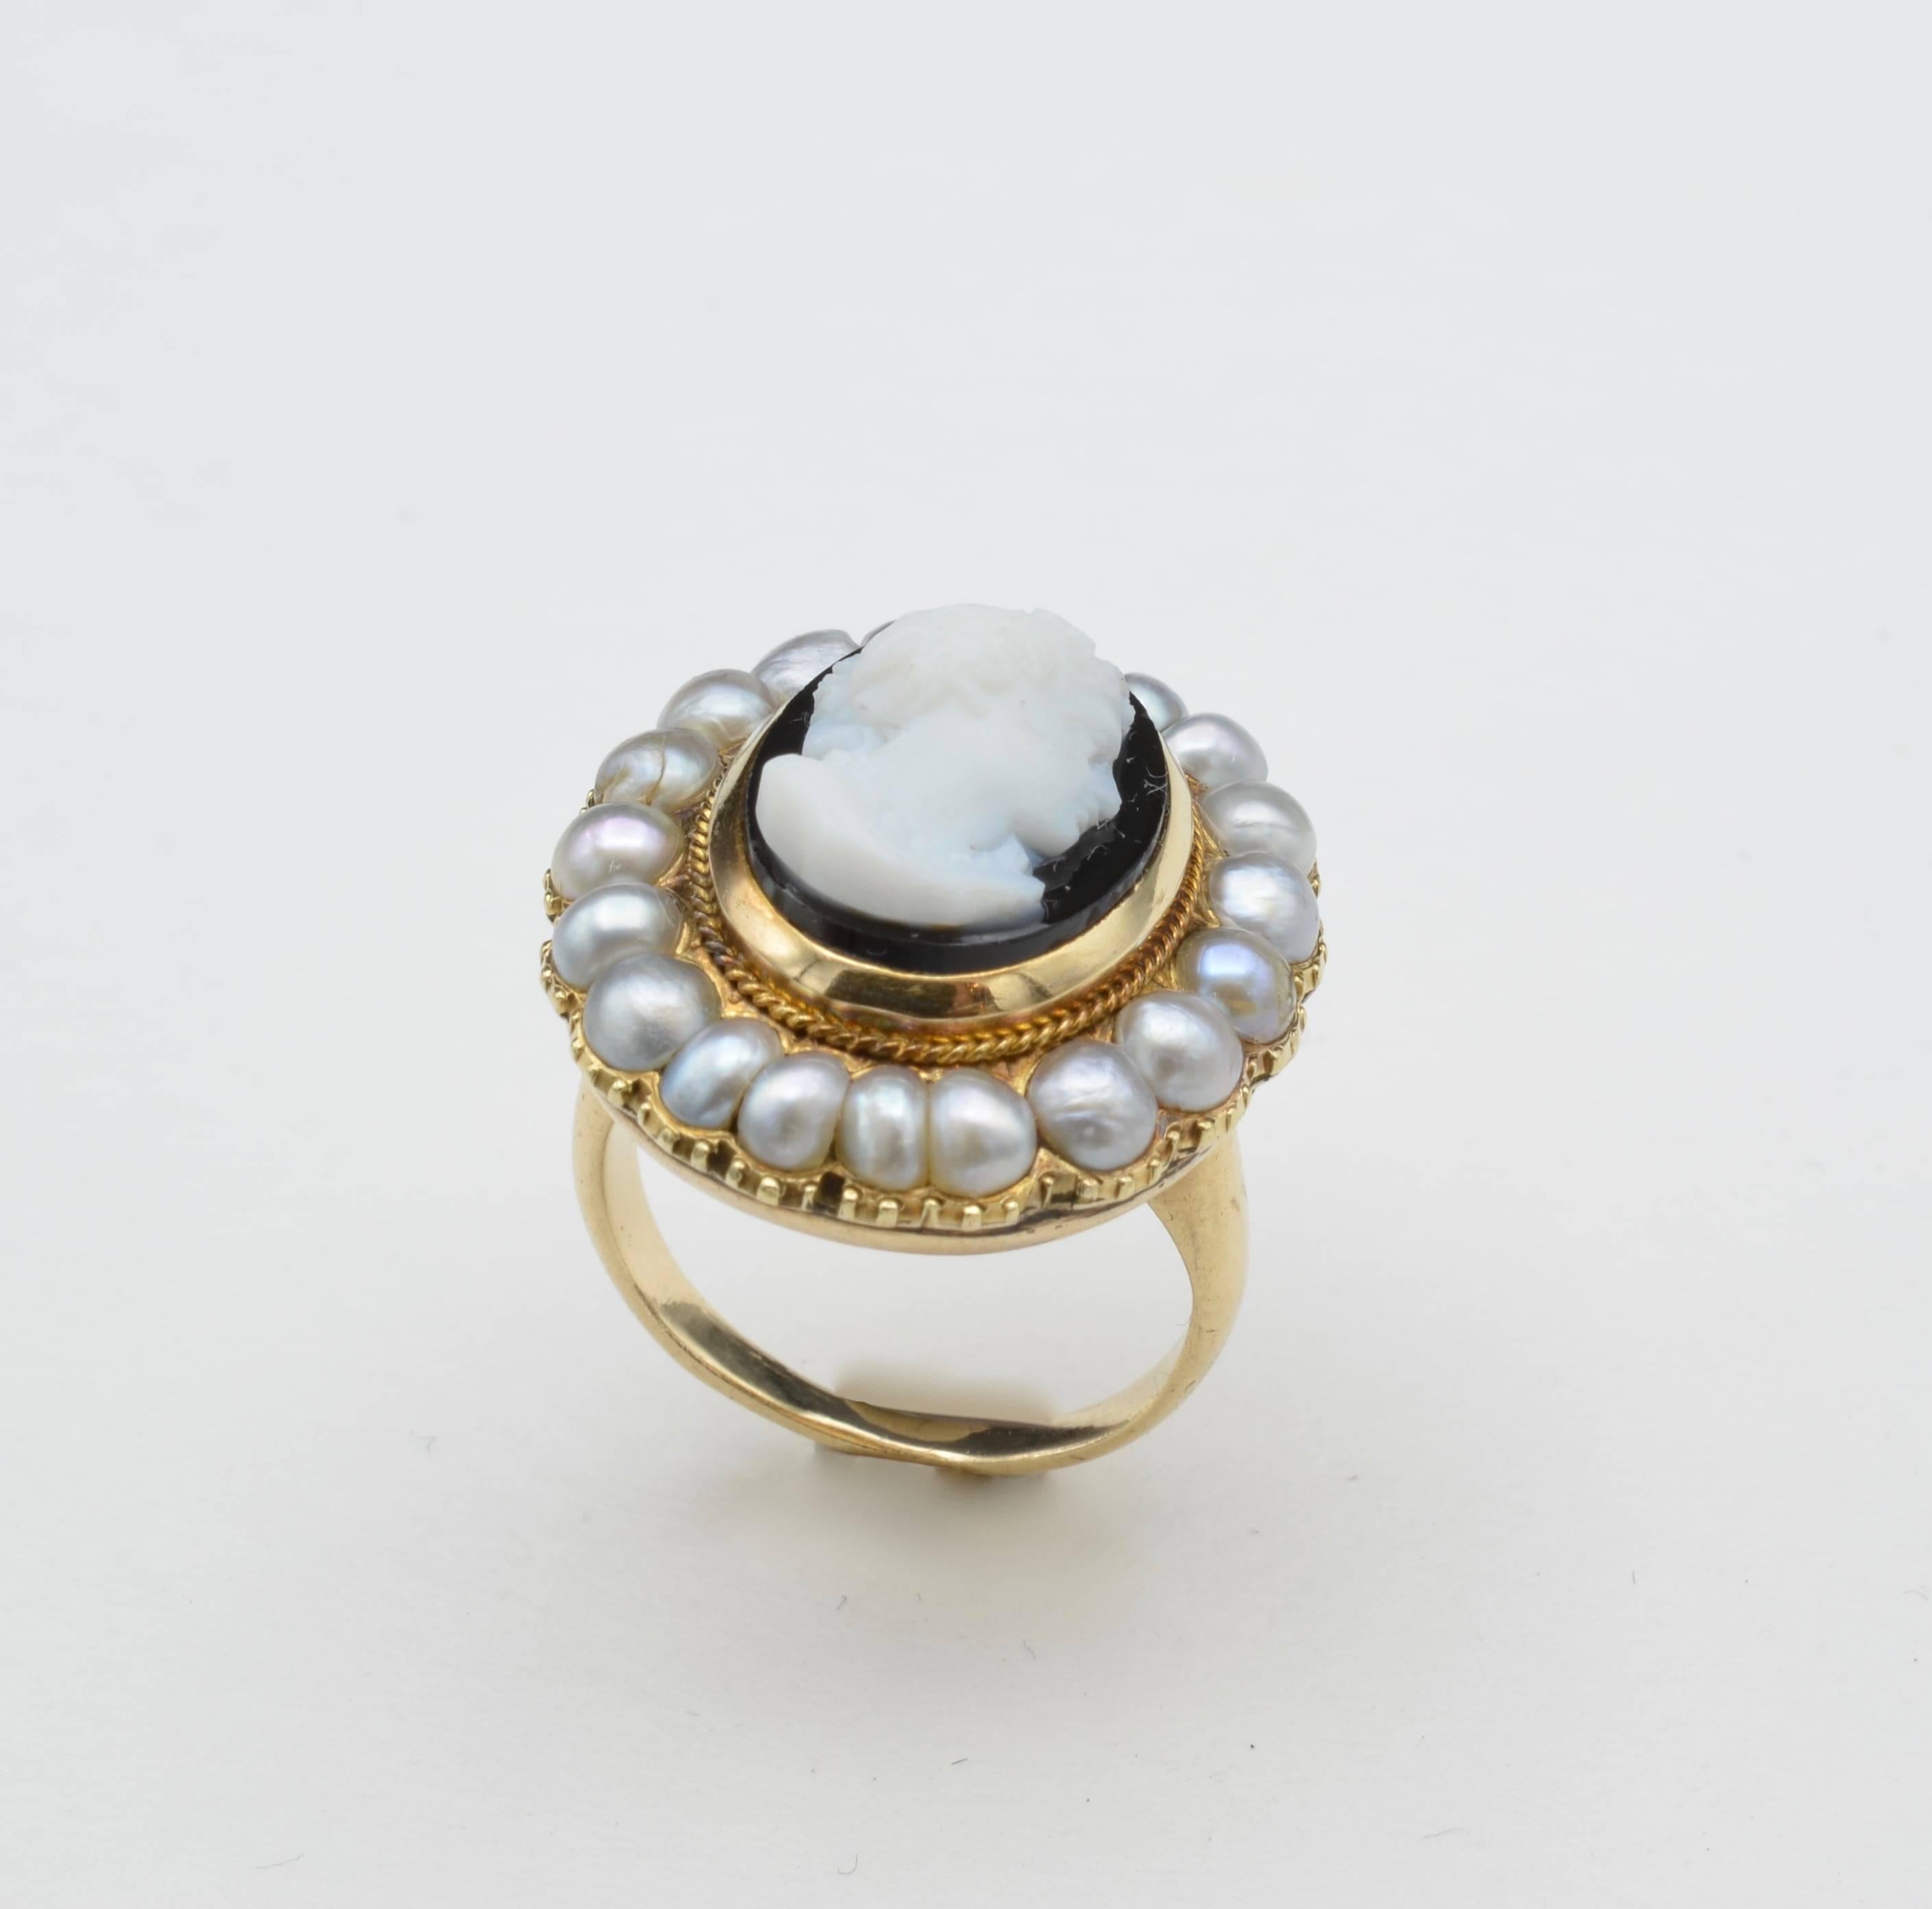 Hand-Carved Onyx Cameo Ring with Pearl Halo from Napoleon III in 18 Karat Gold In Excellent Condition For Sale In Berkeley, CA